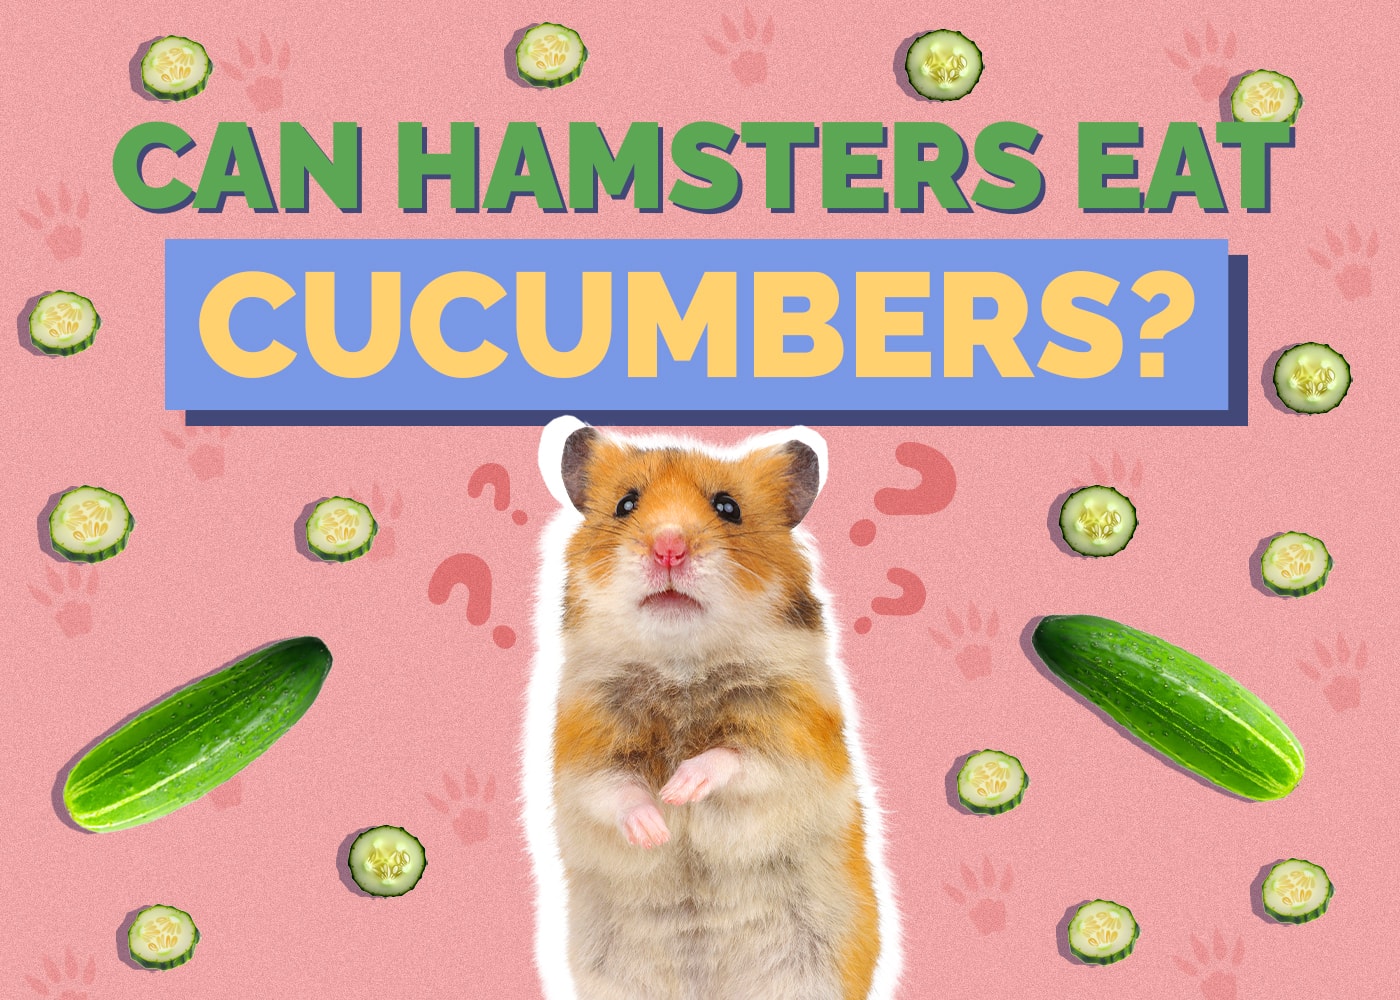 Can Hamsters Eat Cucumbers